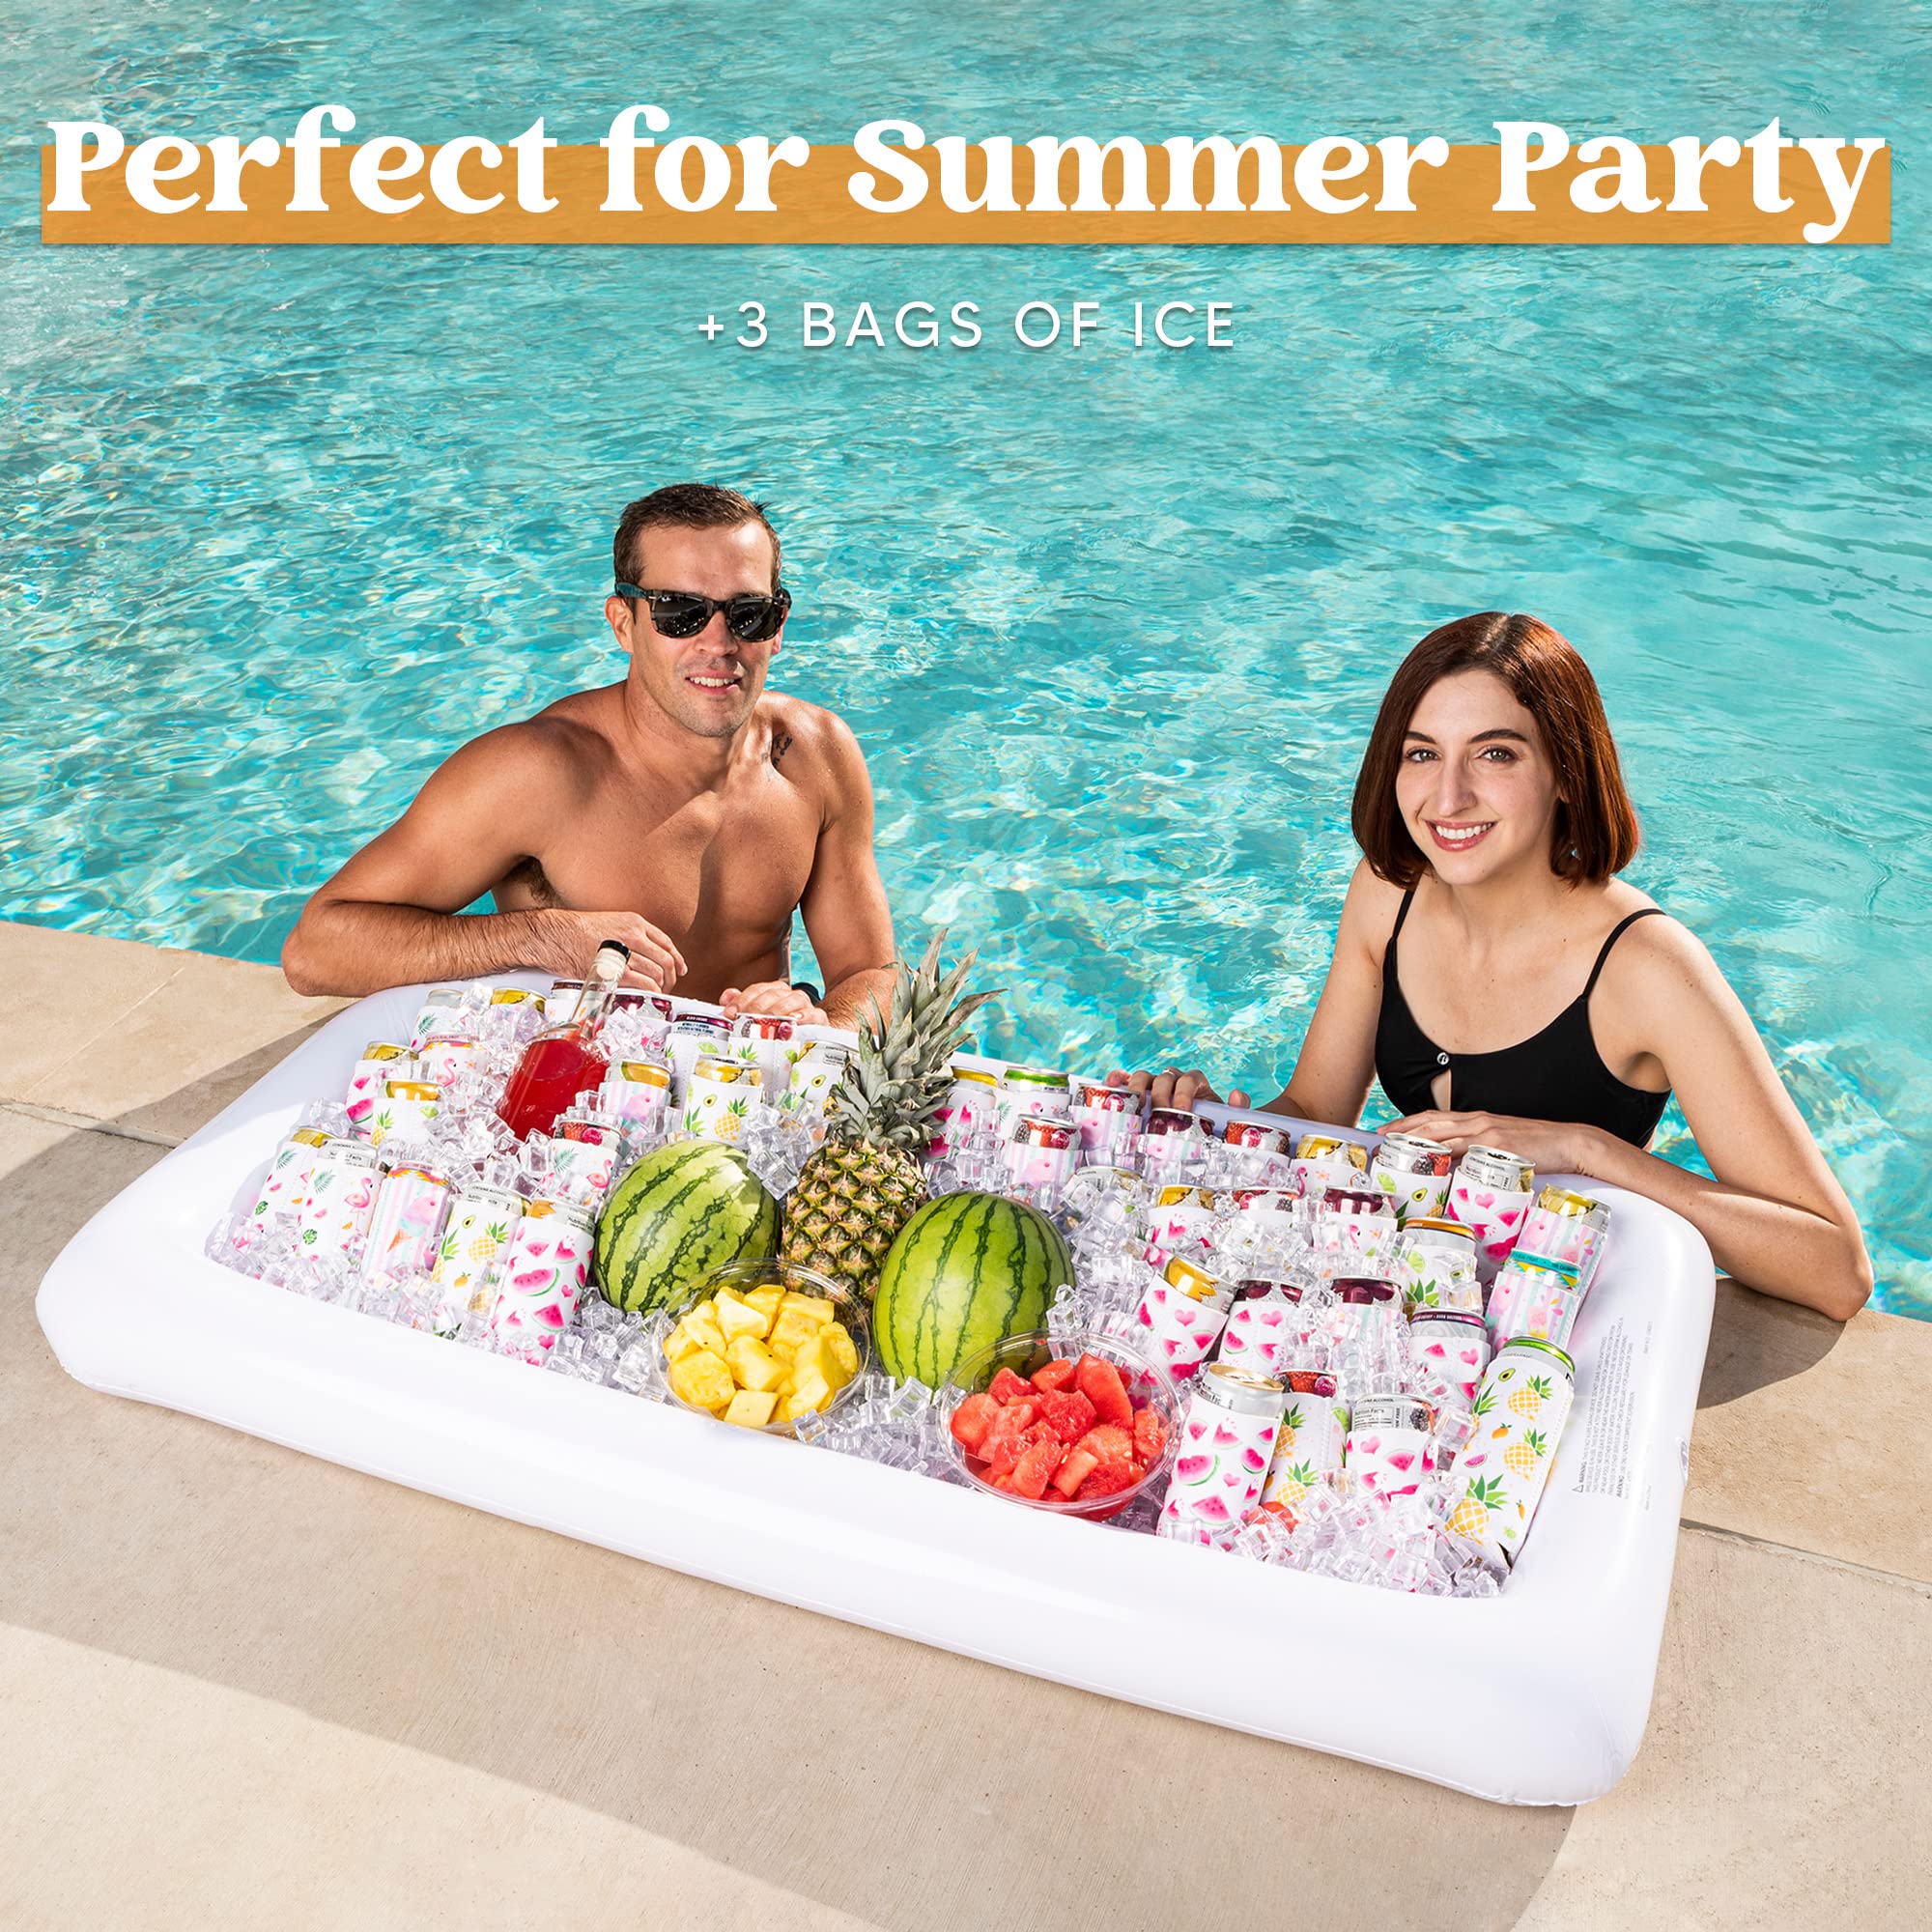 JOYIN Inflatable Serving Bars with Drain Plug (3 Sets), Inflatable Cooler Ice Buffet Salad Serving Trays for Indoor Outdoor Summer Beach Luau Party, Picnic, and Pool Party